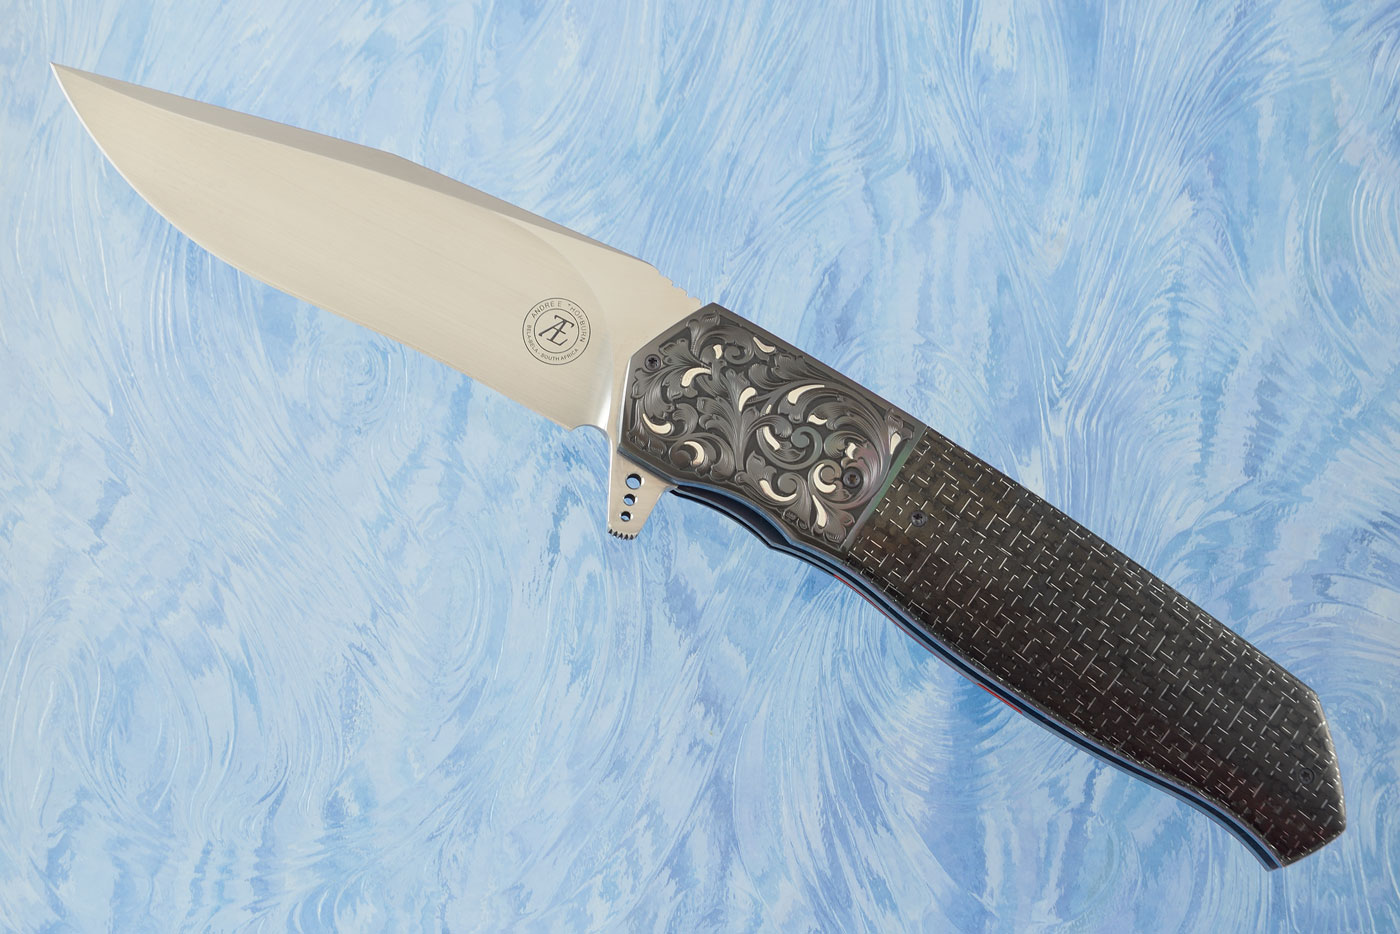 L36M Flipper - Silver Strike Carbon Fiber with Engraved Zirconium and Silver Inlay (Ceramic IKBS)